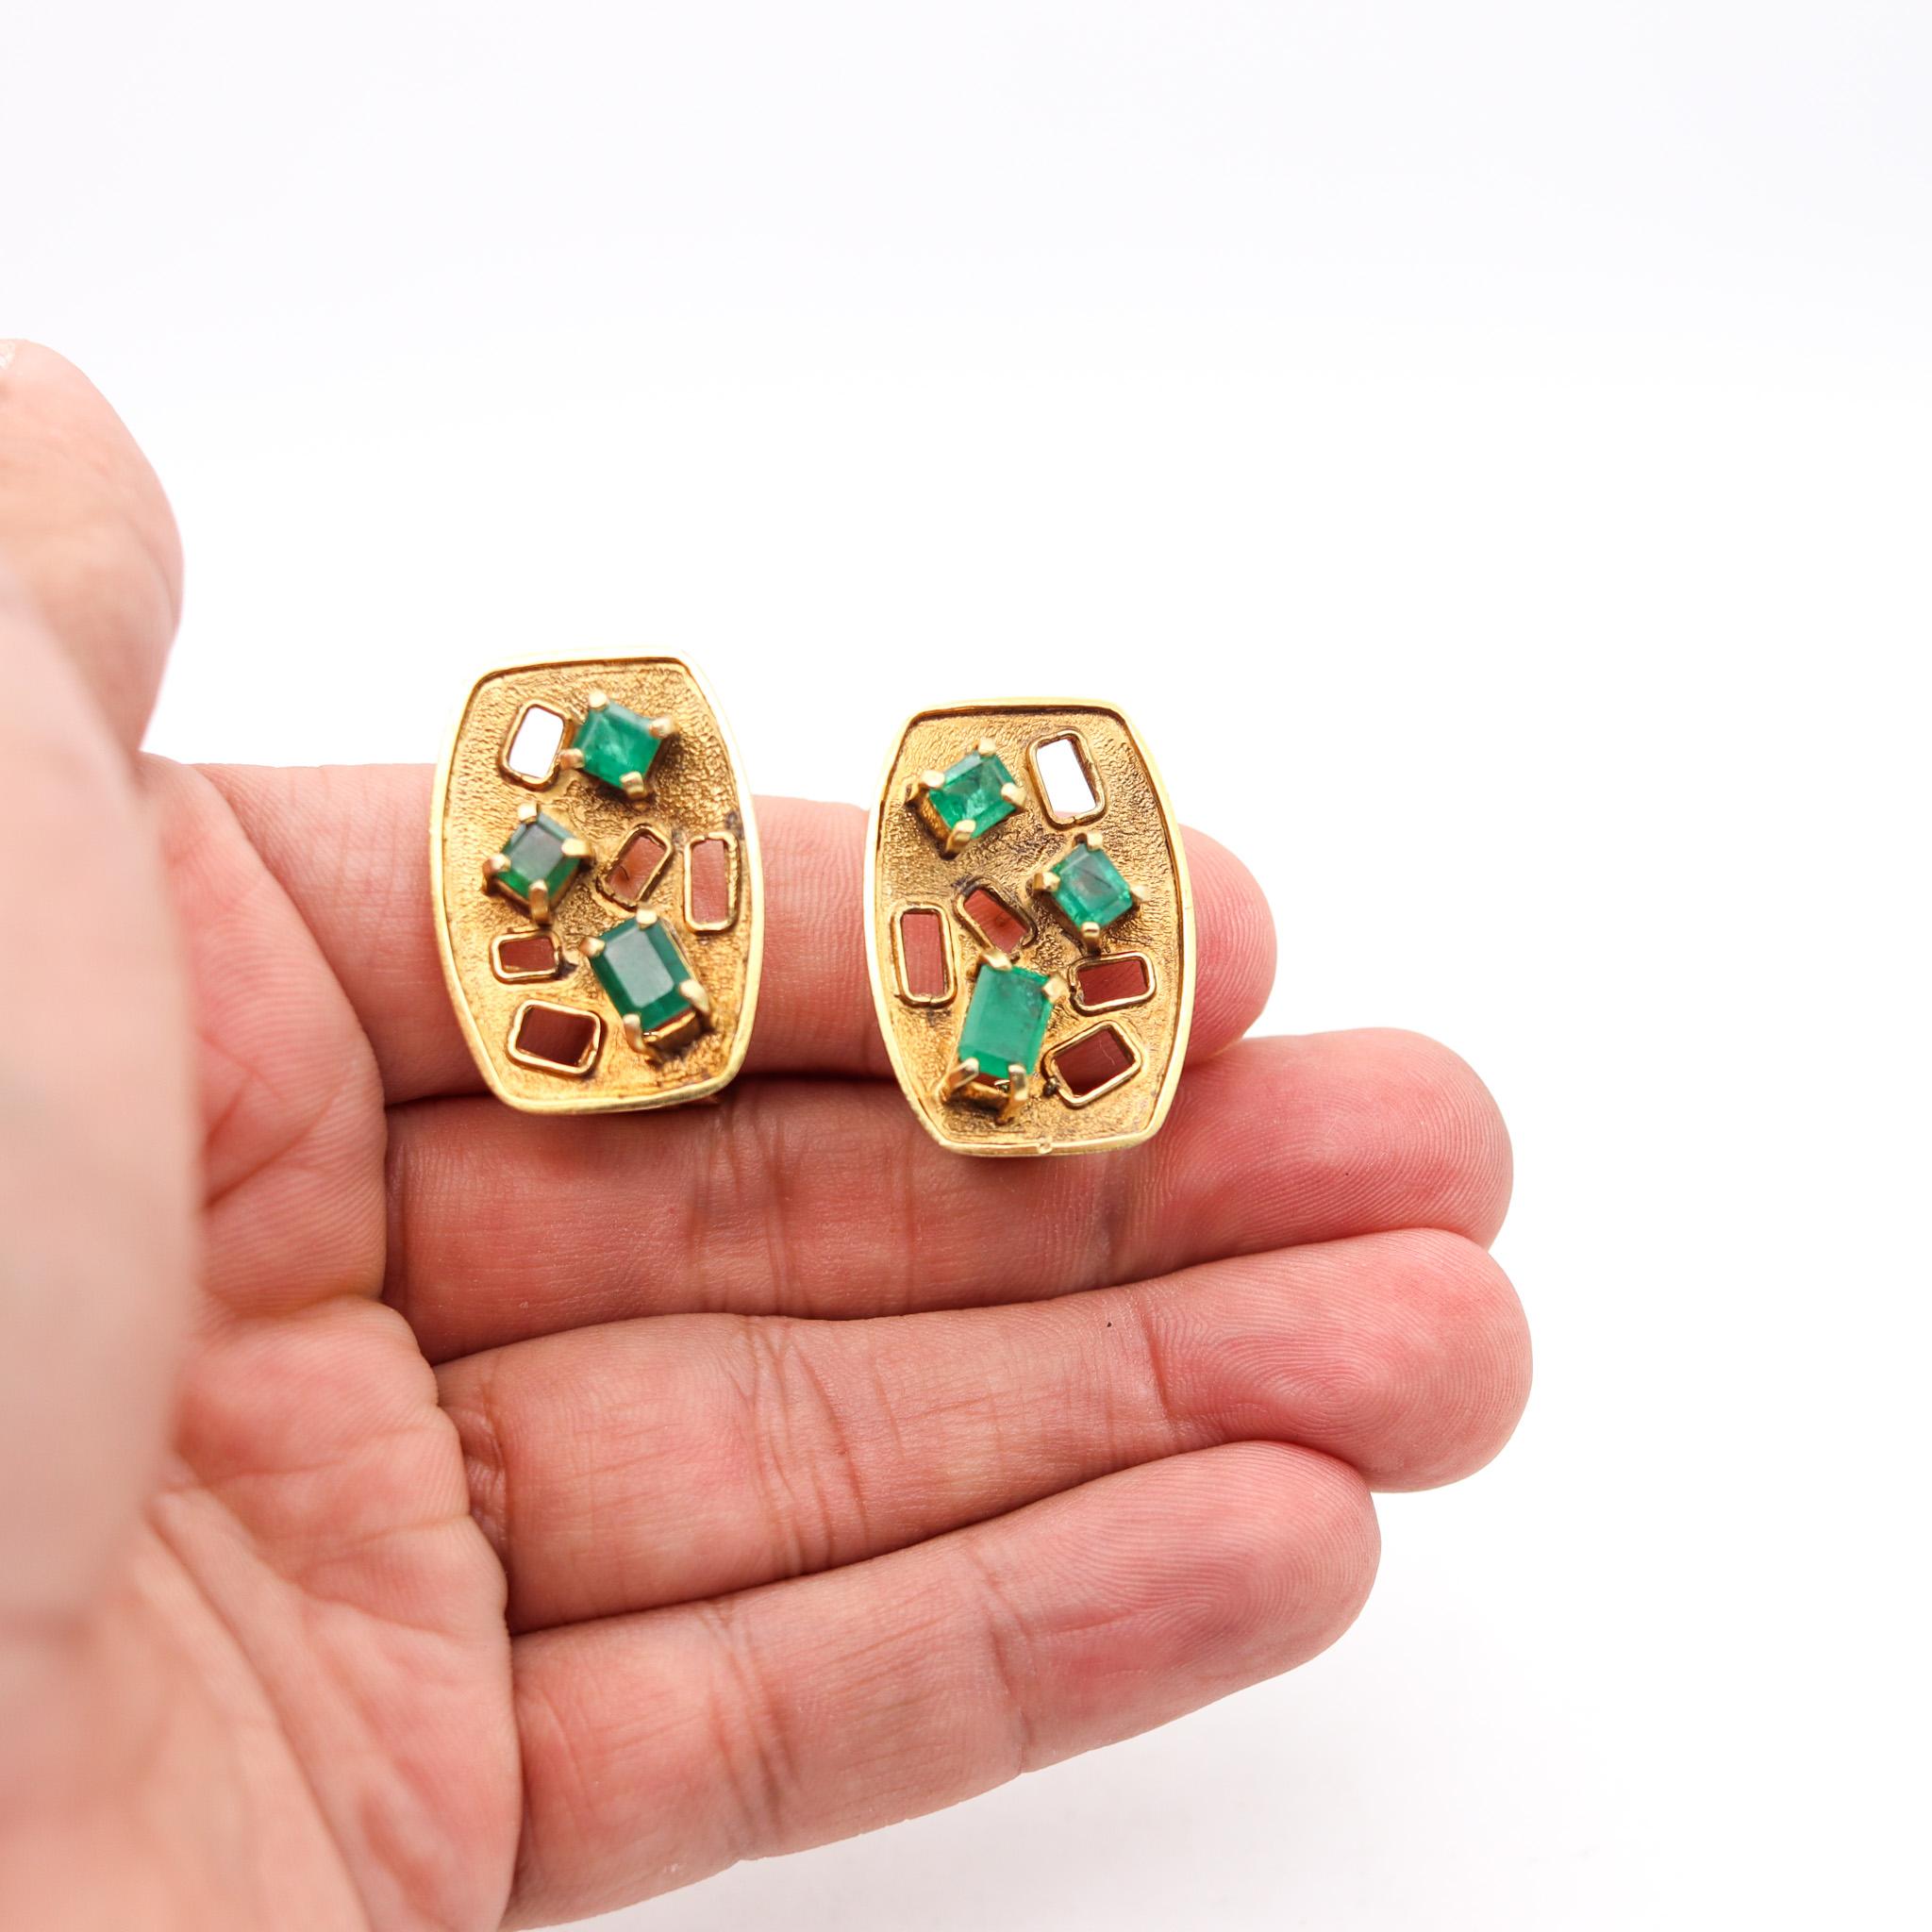 Emerald Cut Bruno Guidi 1970 Retro Modernist Earrings In 18Kt Gold With 4.45 Ctw In Emeralds For Sale